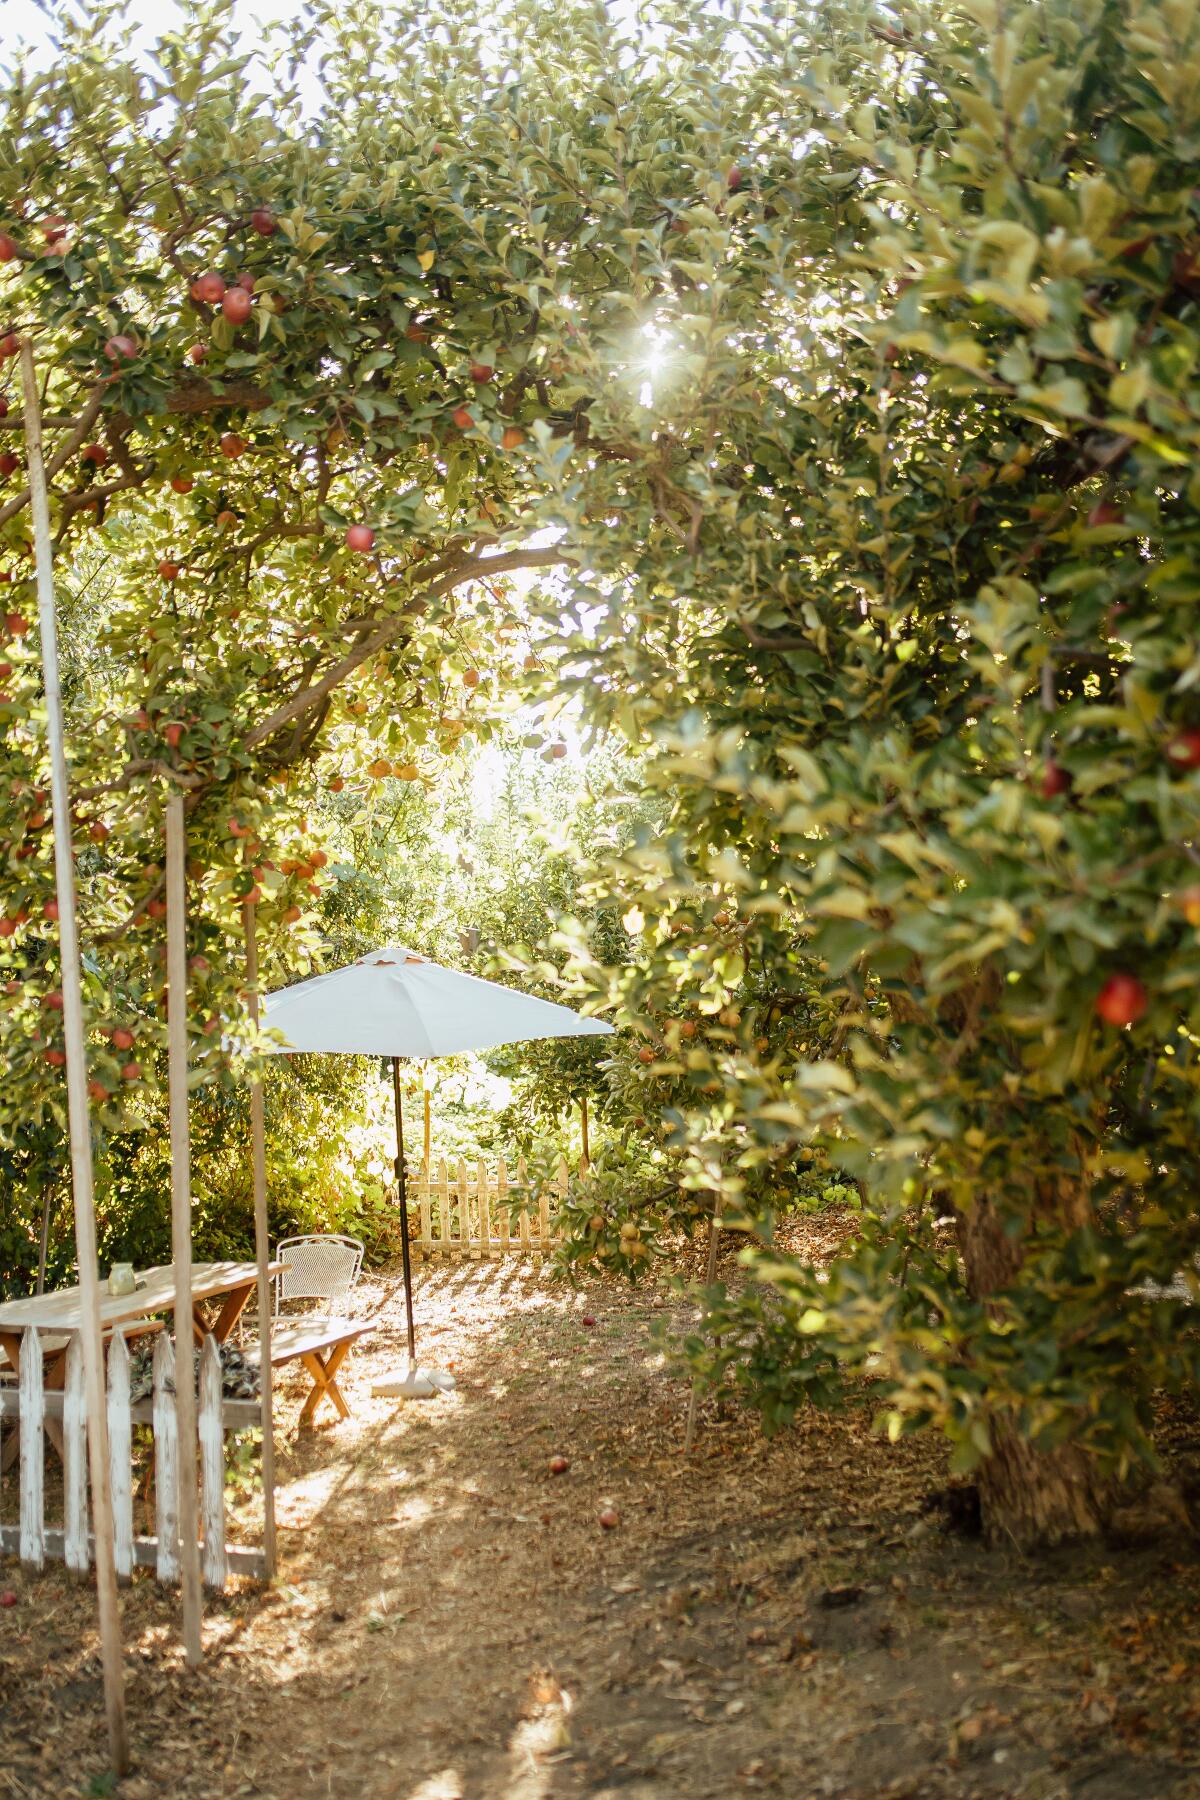 Sun filters through the upper branches of apple trees, with a white umbrella and seating area in the center of the photo